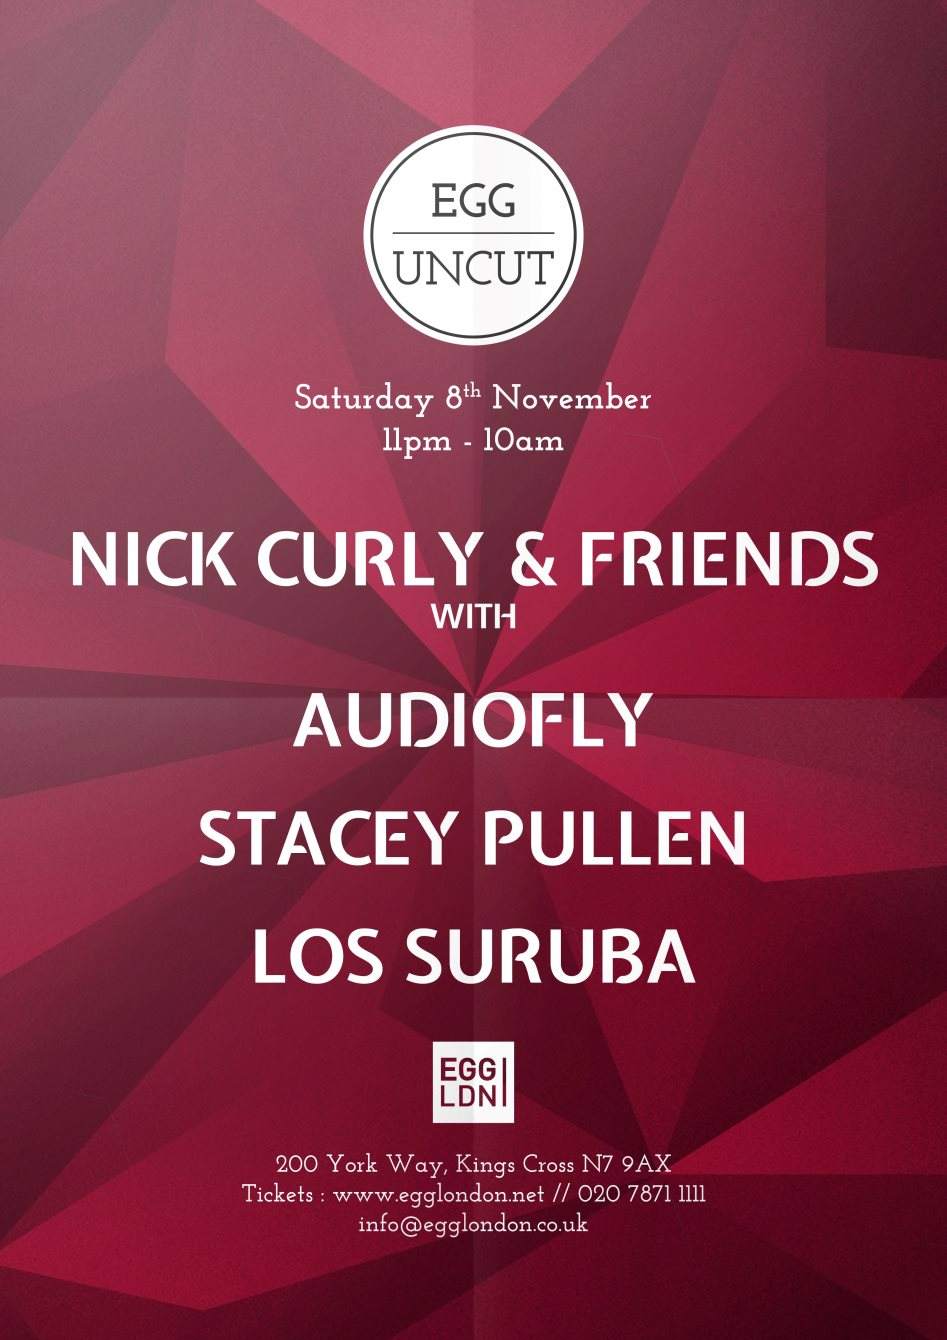 Egg Uncut presents: Nick Curly and Friends with Audiofly, Stacey Pullen, Los Suruba - Página frontal